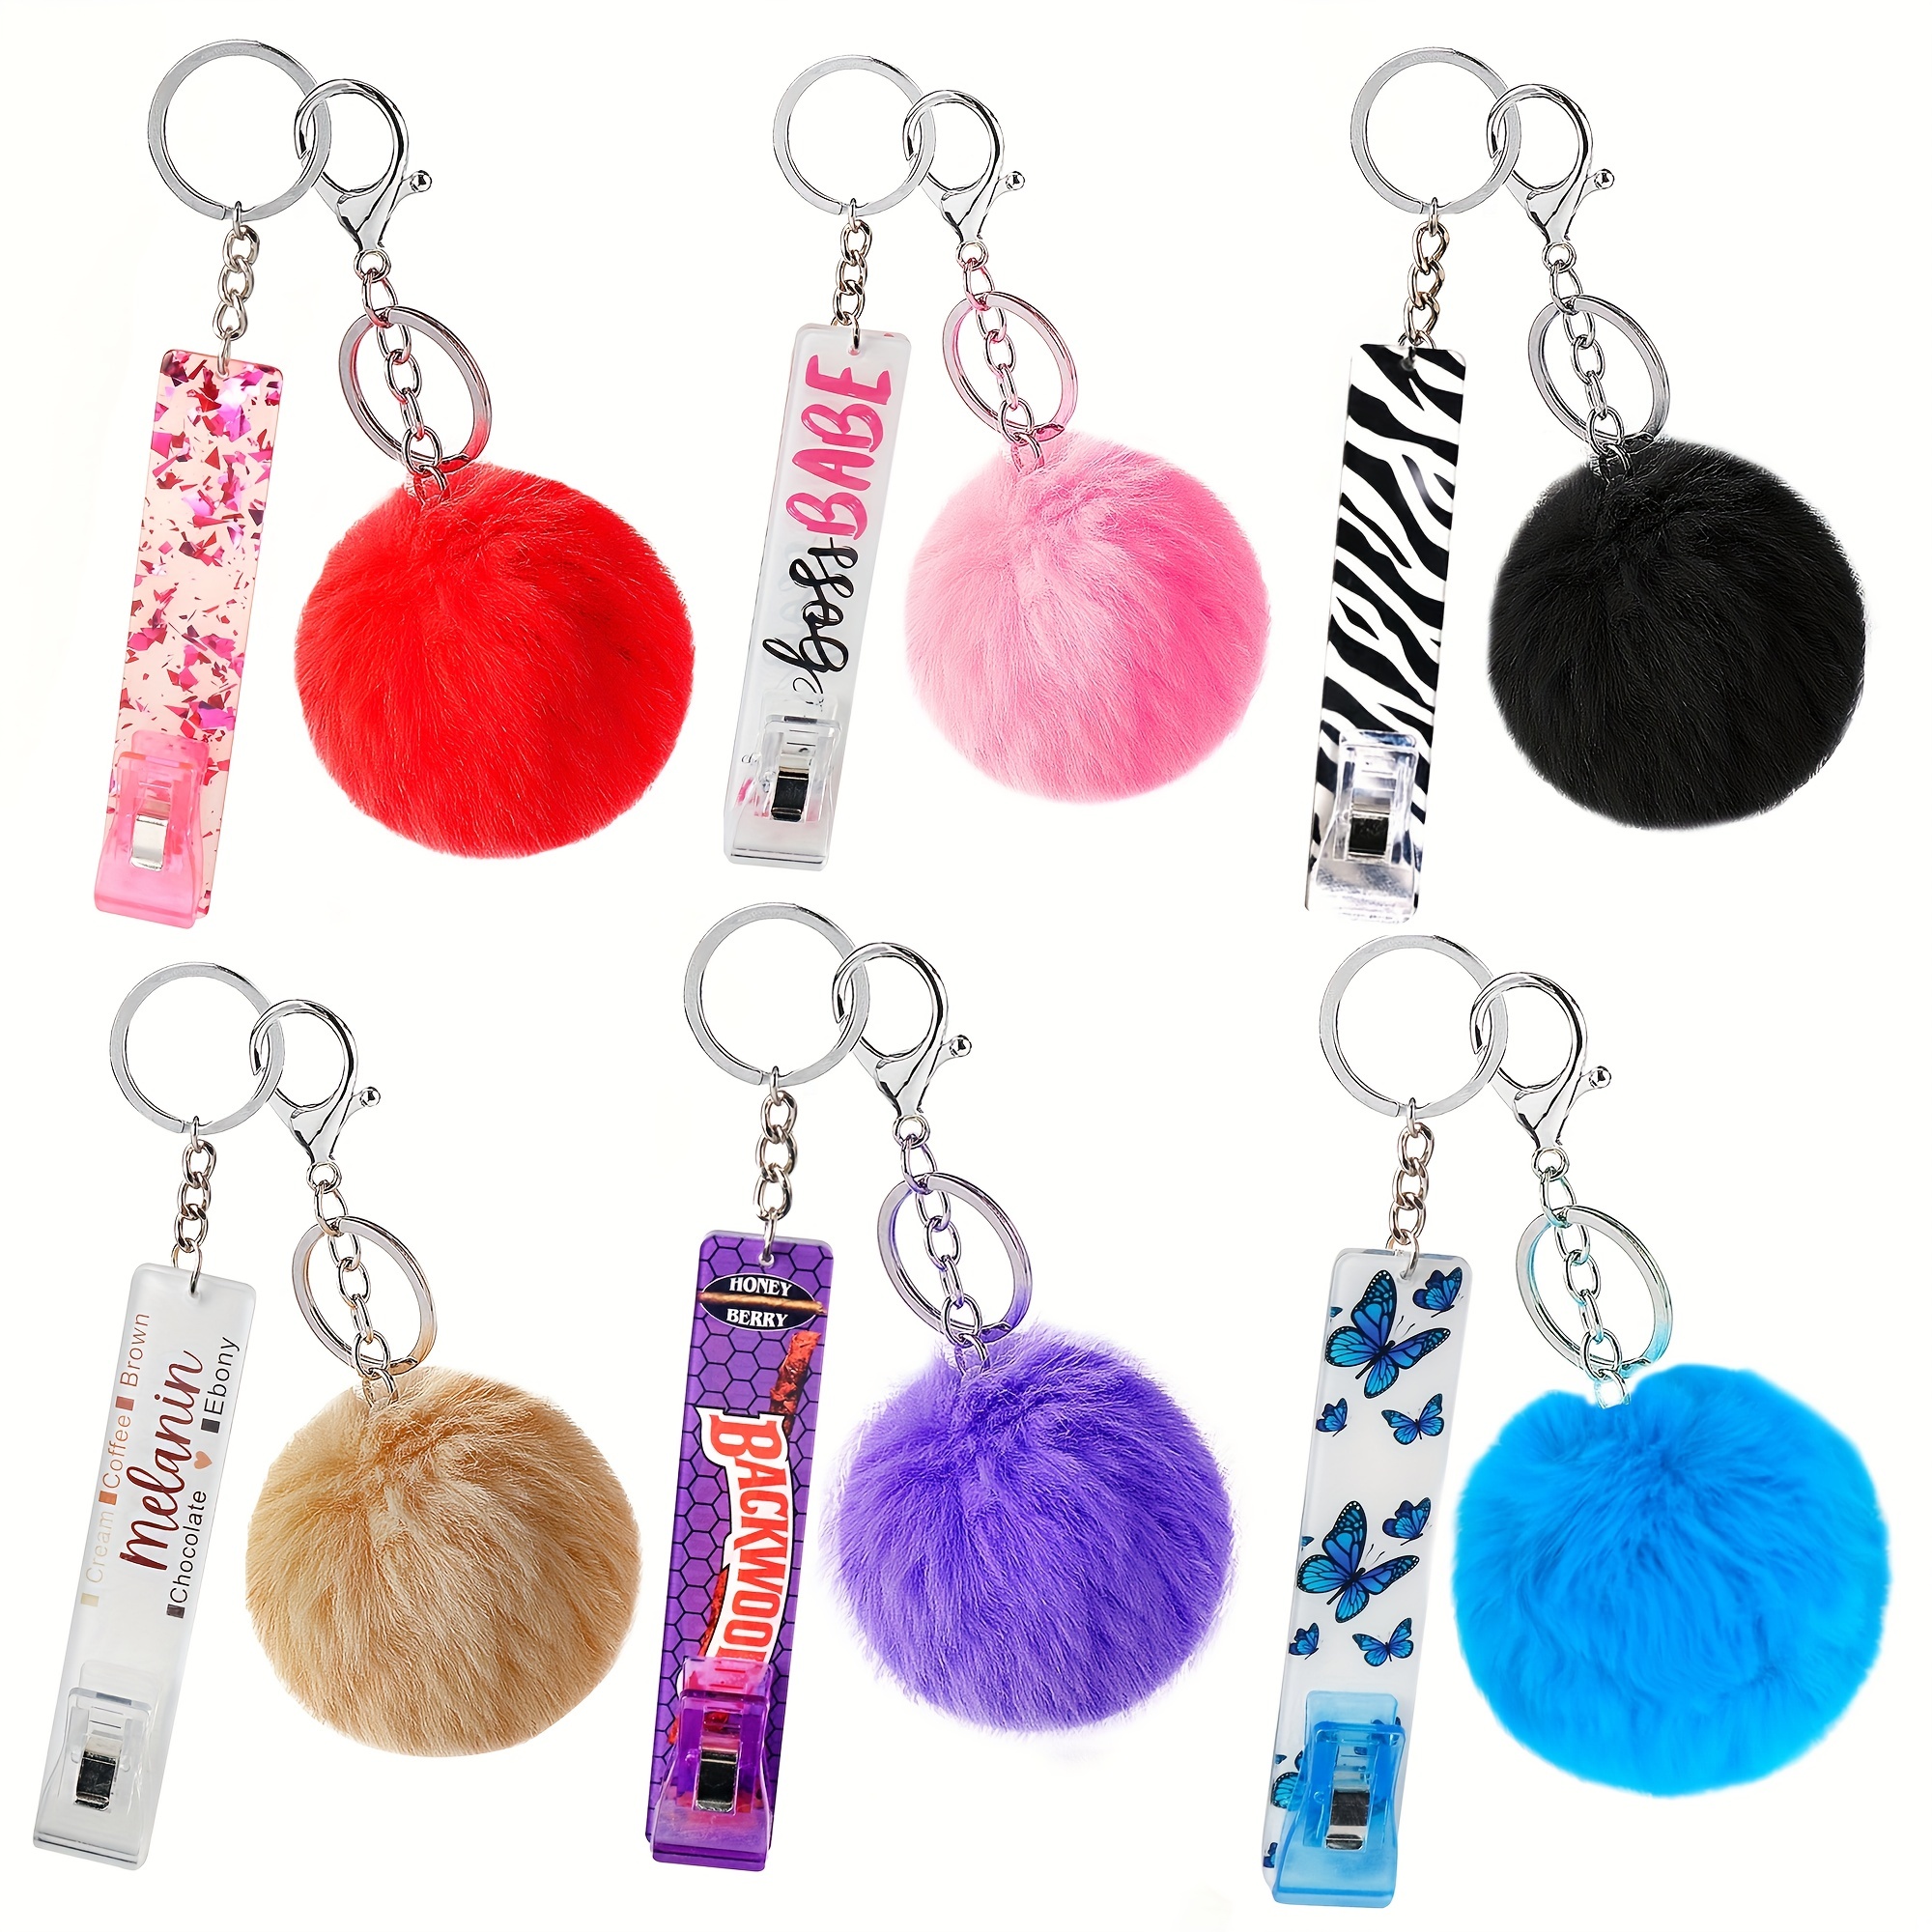 Generic Credit Card Grabber for Long Nails,Acrylic Debit Bank Card Puller  Keychain for Women Plastic Atm Card Clip and Pom Pom Ball